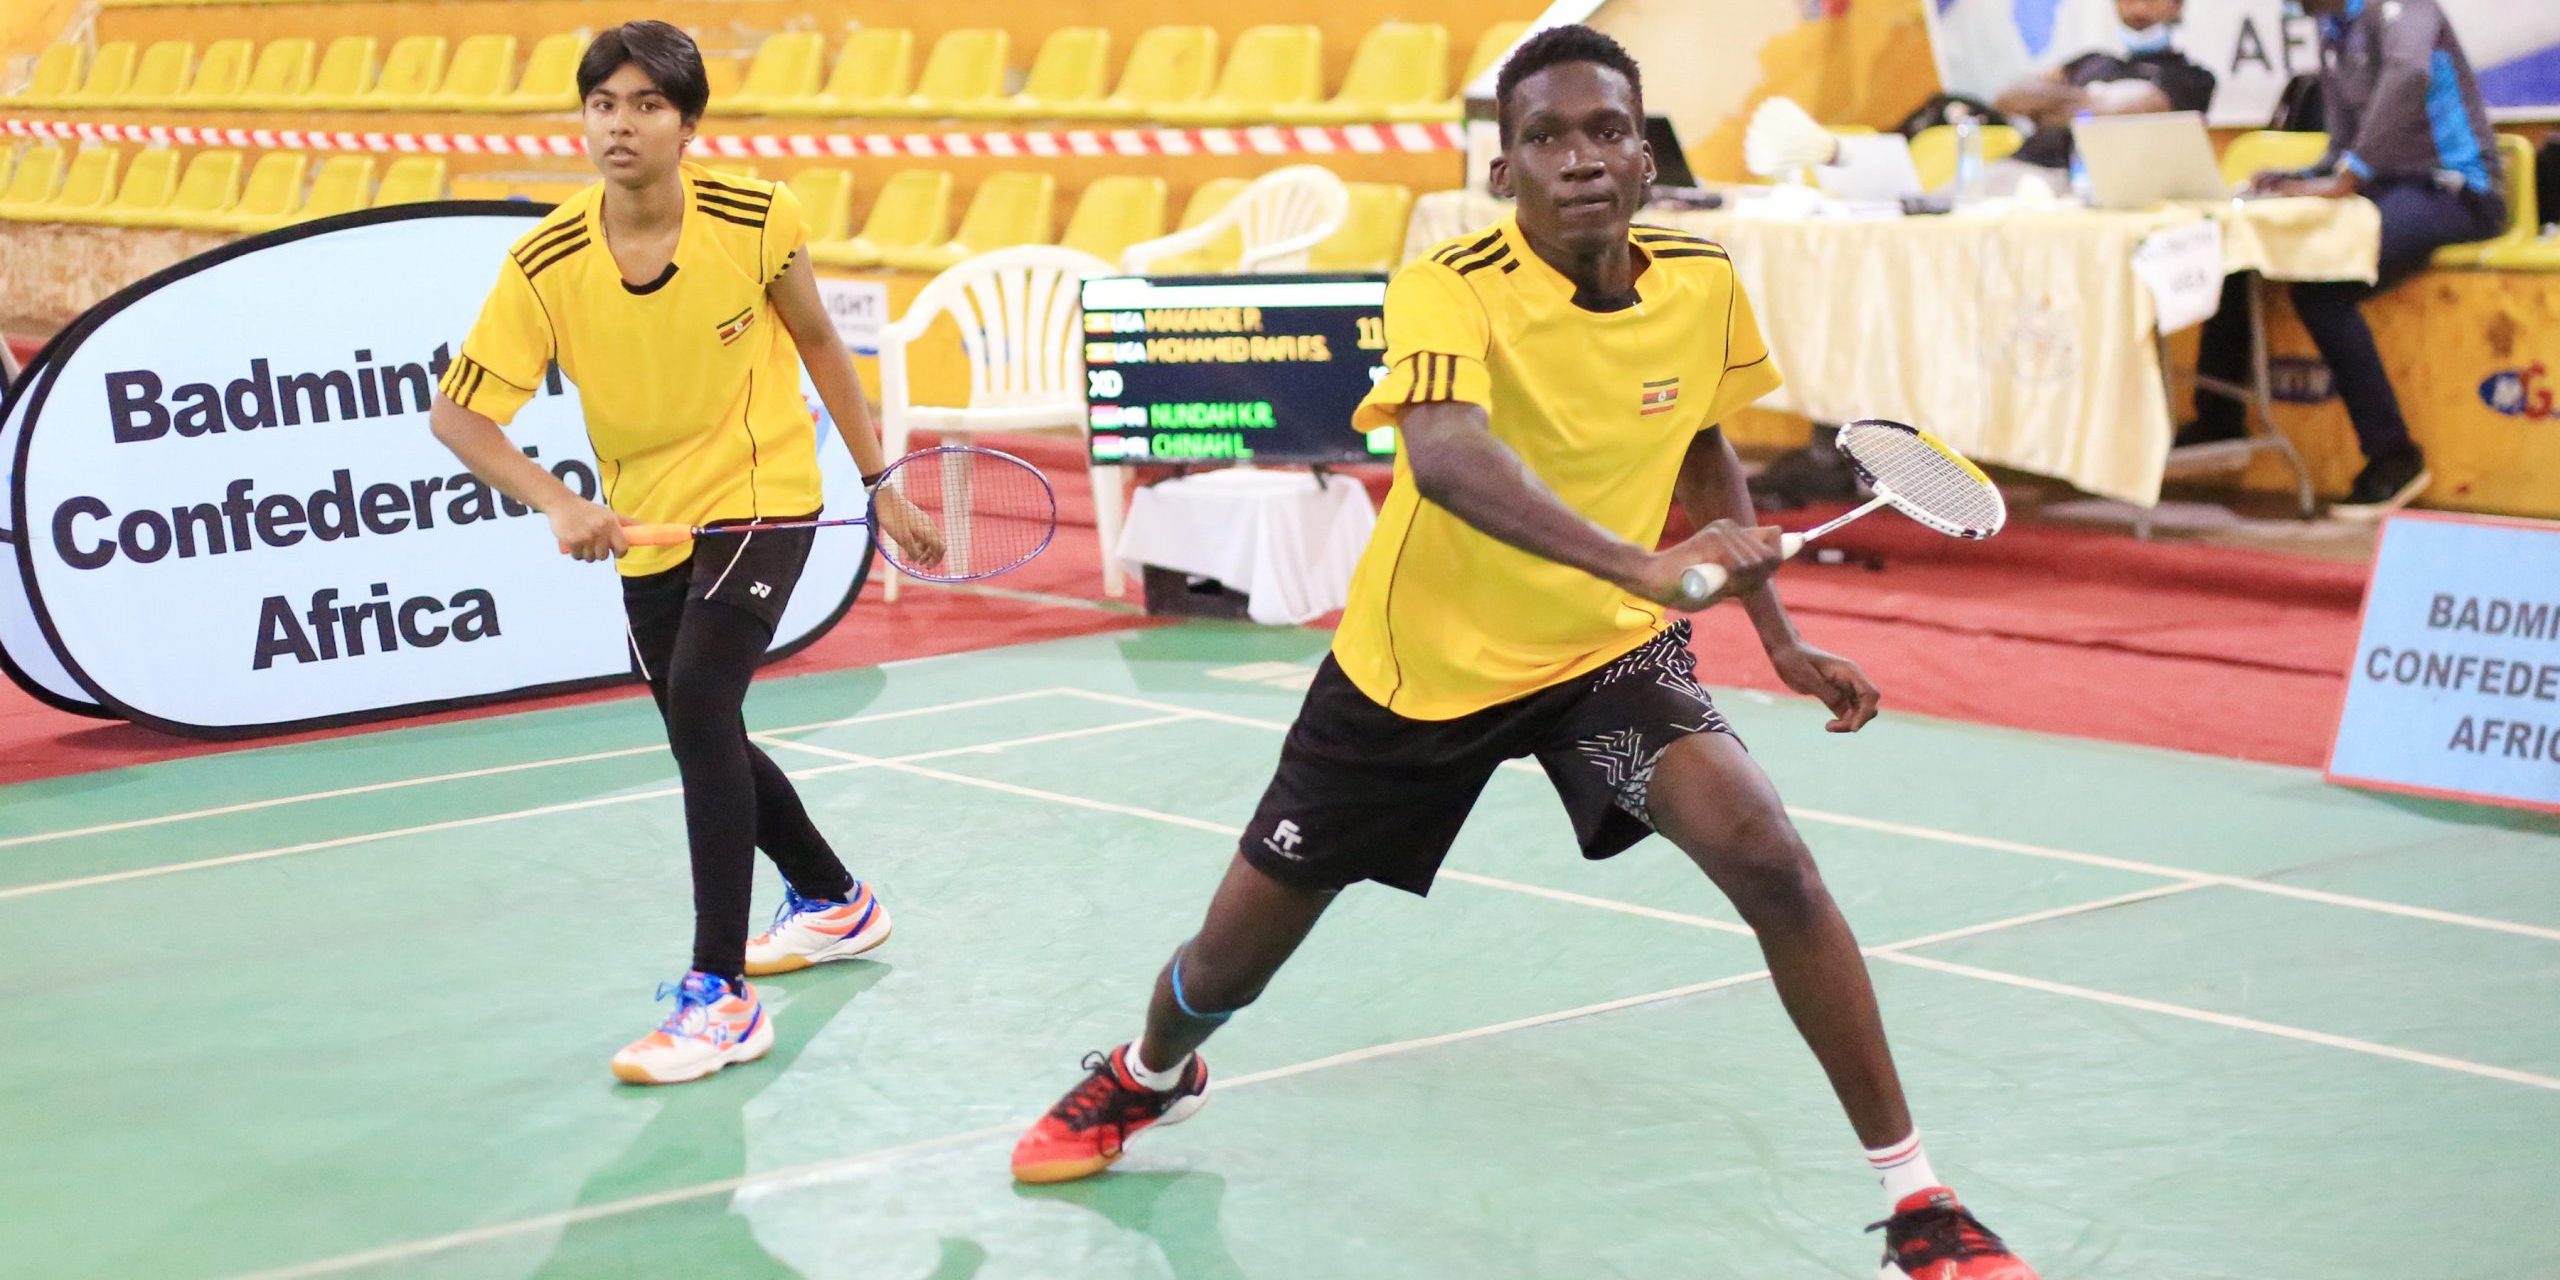 Uganda players still in the country as Africa games start with table tennis and Badminton in Ghana